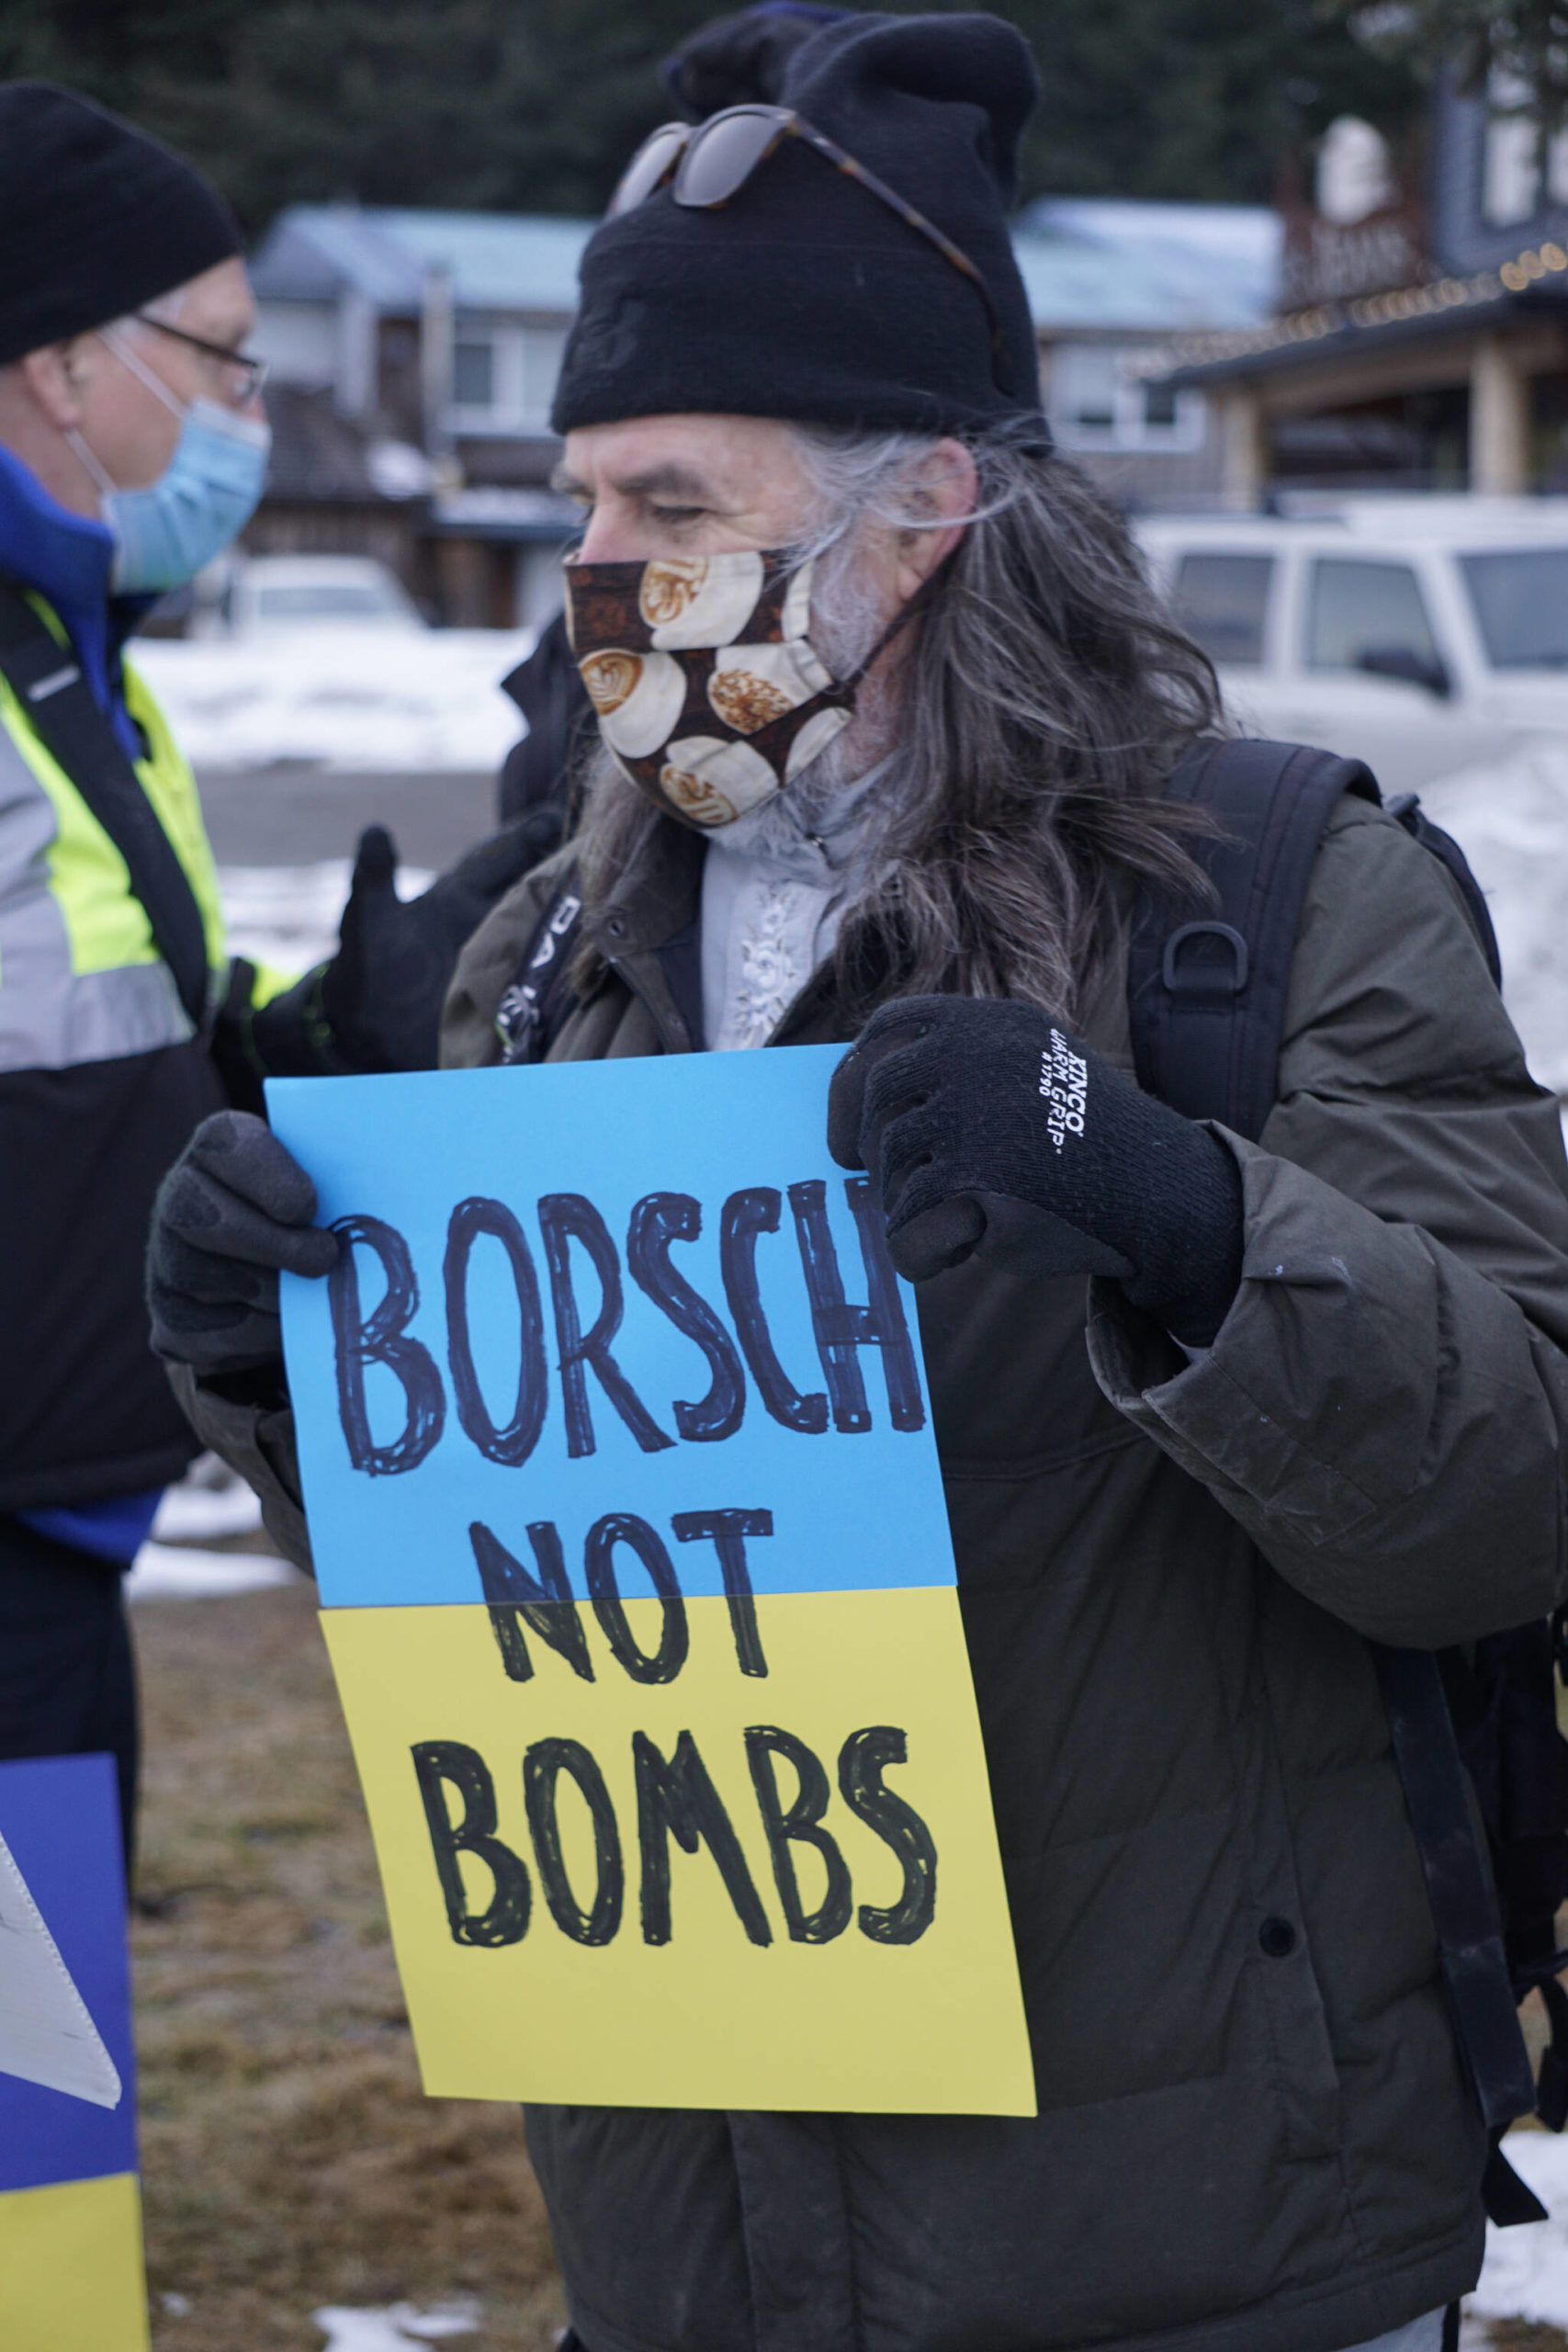 Wes Schatz holds a sign in support of Ukraine at a demonstration on Thursday, March 3, 2022, at WKFL Park in Homer, Alaska. (Photo by Michael Armstrong/Homer News)